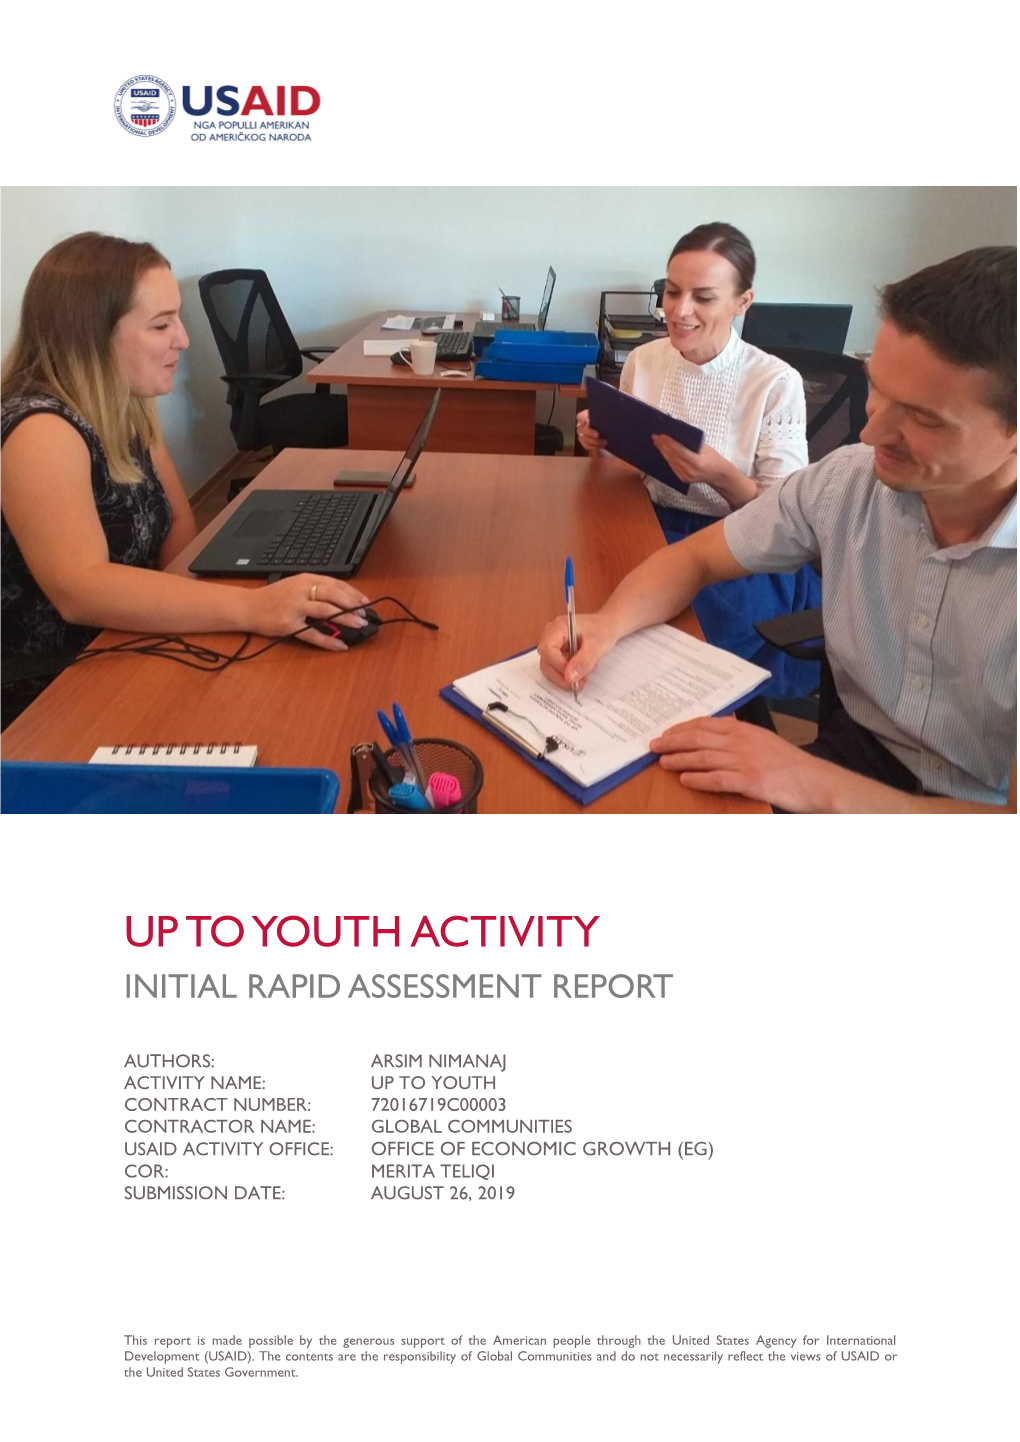 Up to Youth Activity Initial Rapid Assessment Report